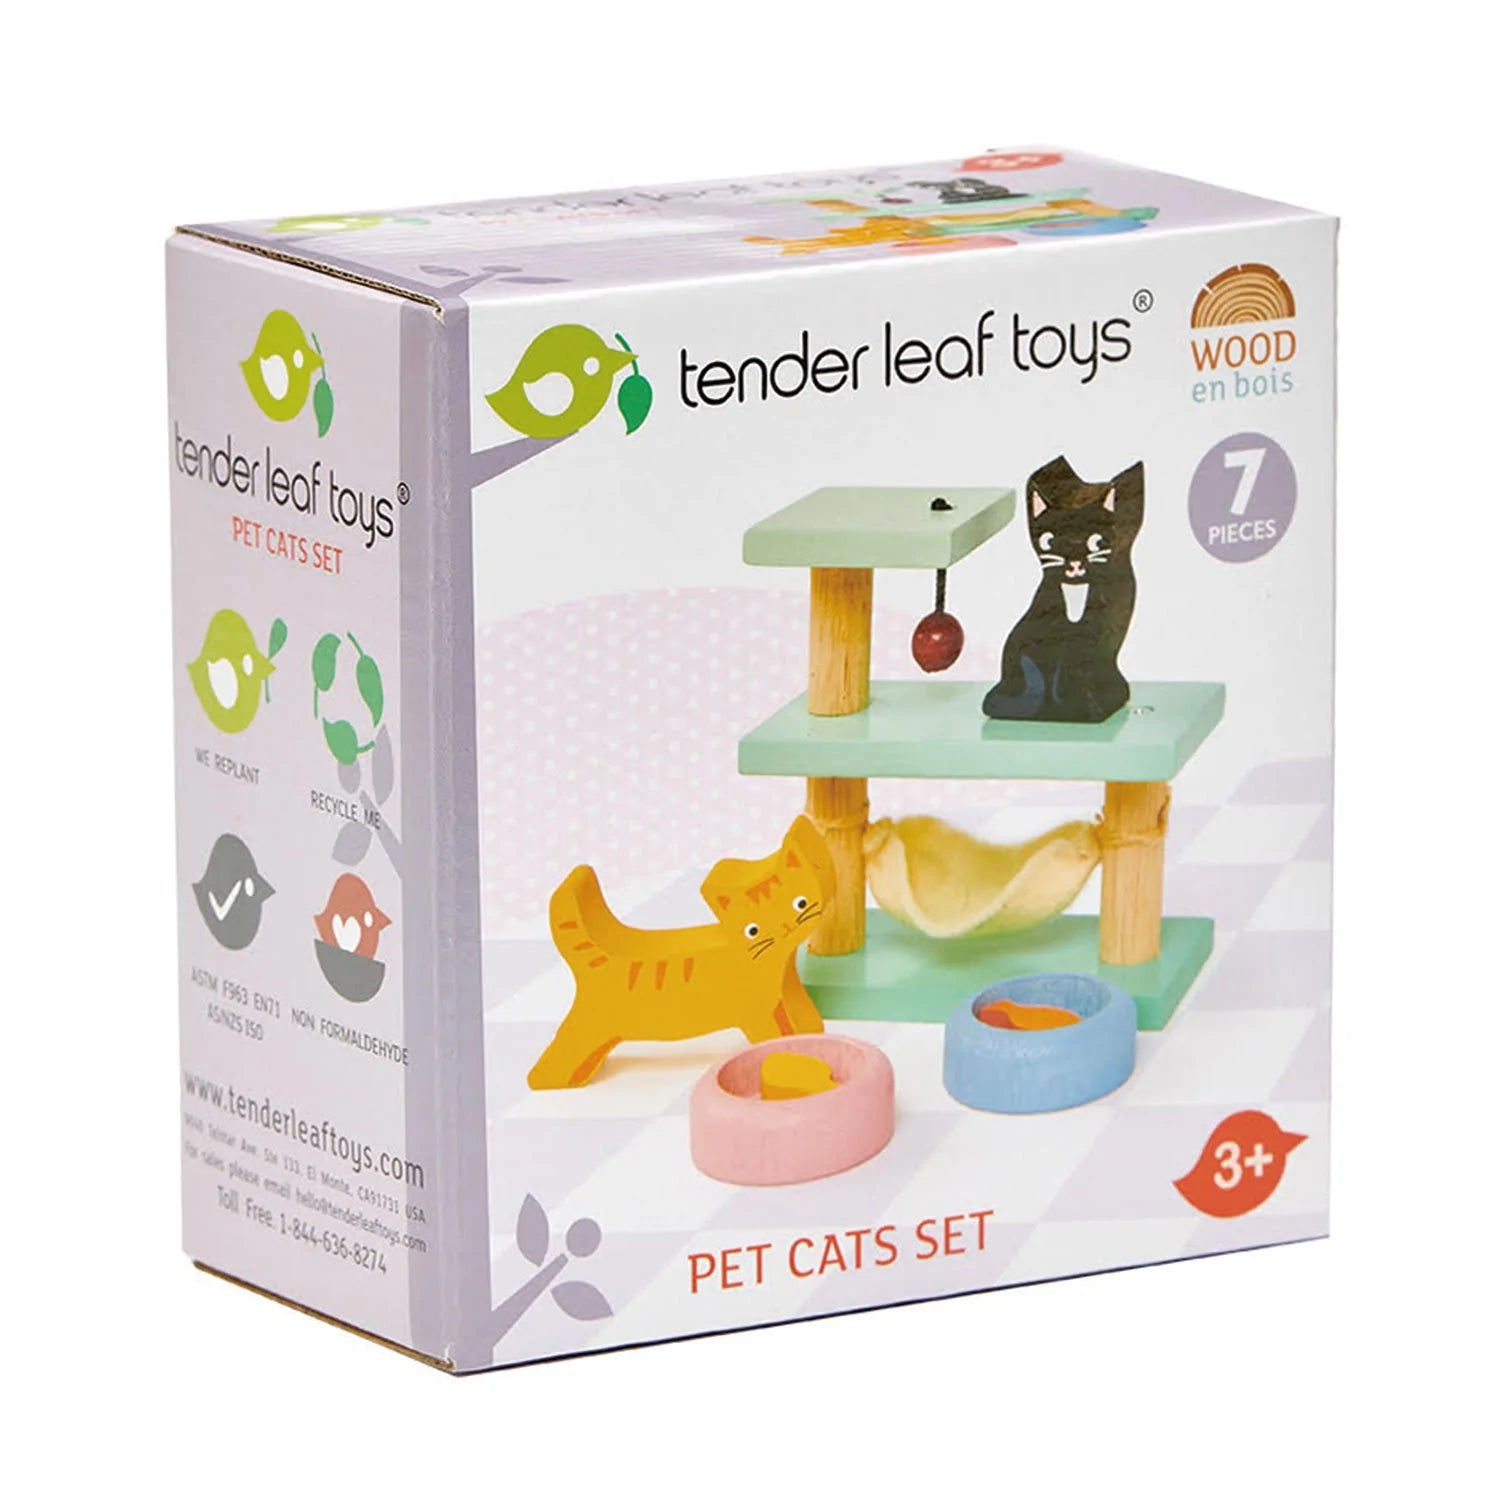 pet cats set by tender leaf toys